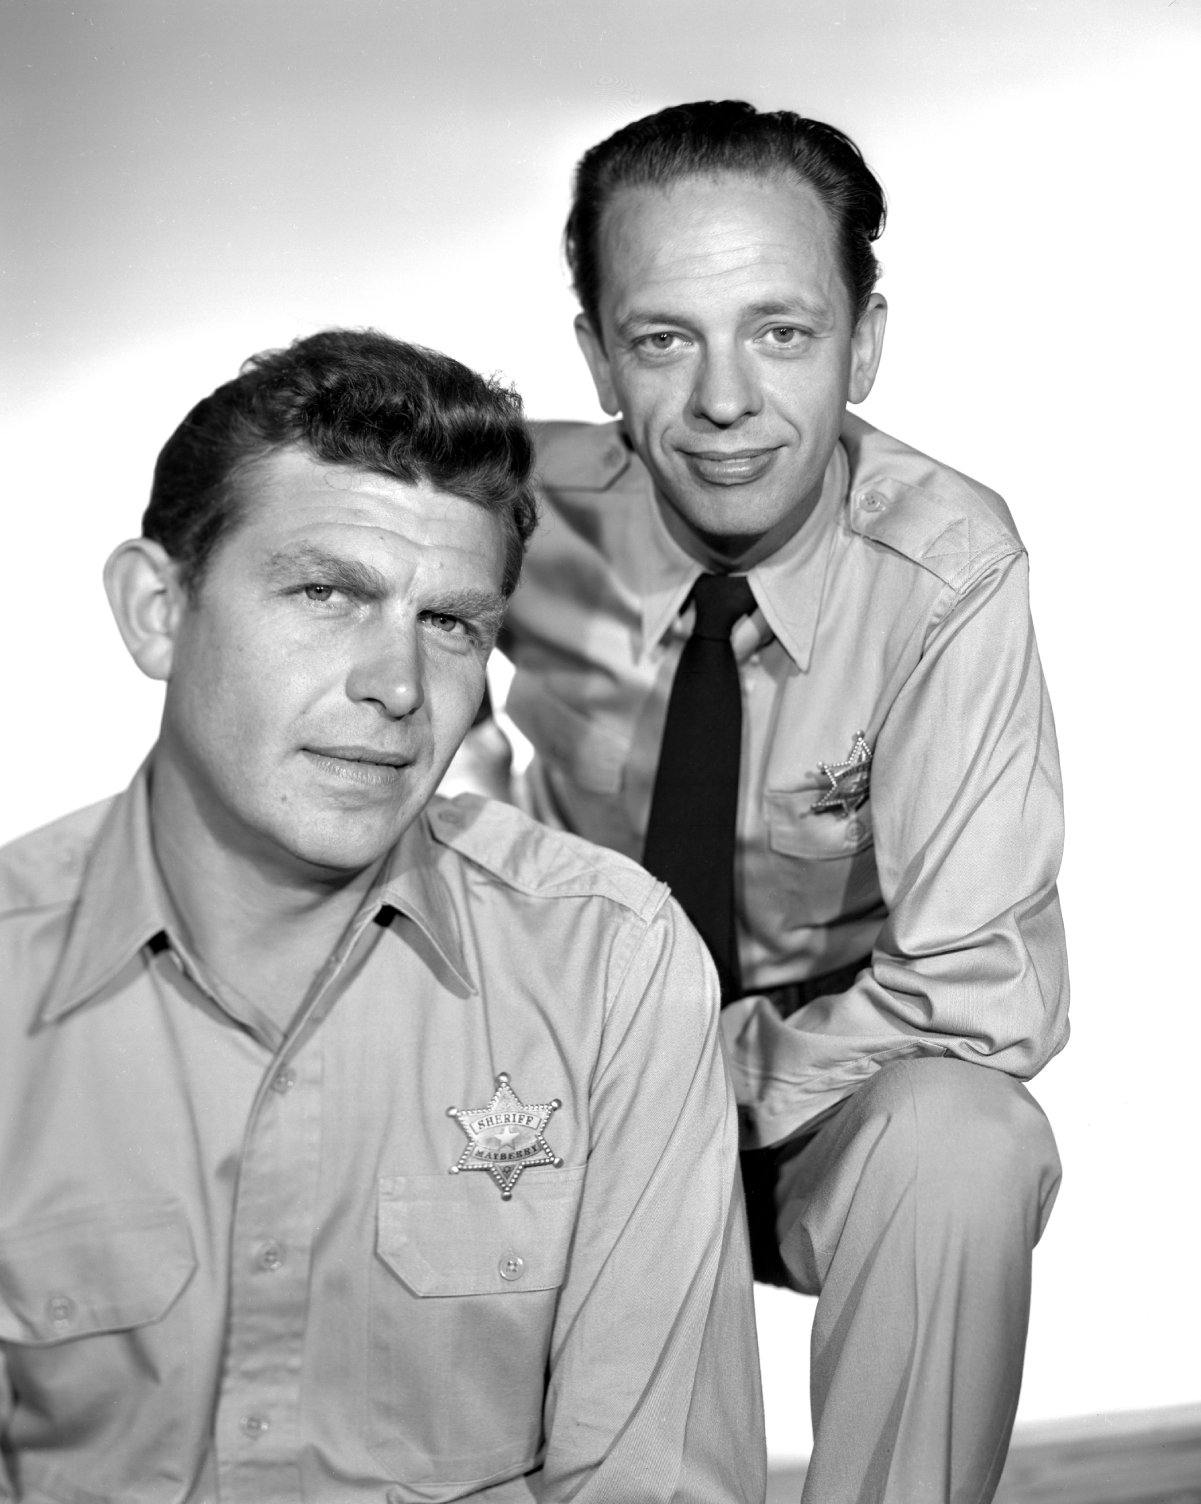 The Andy Griffith Show Don Knotts Barney Fife Character Was Years In The Making